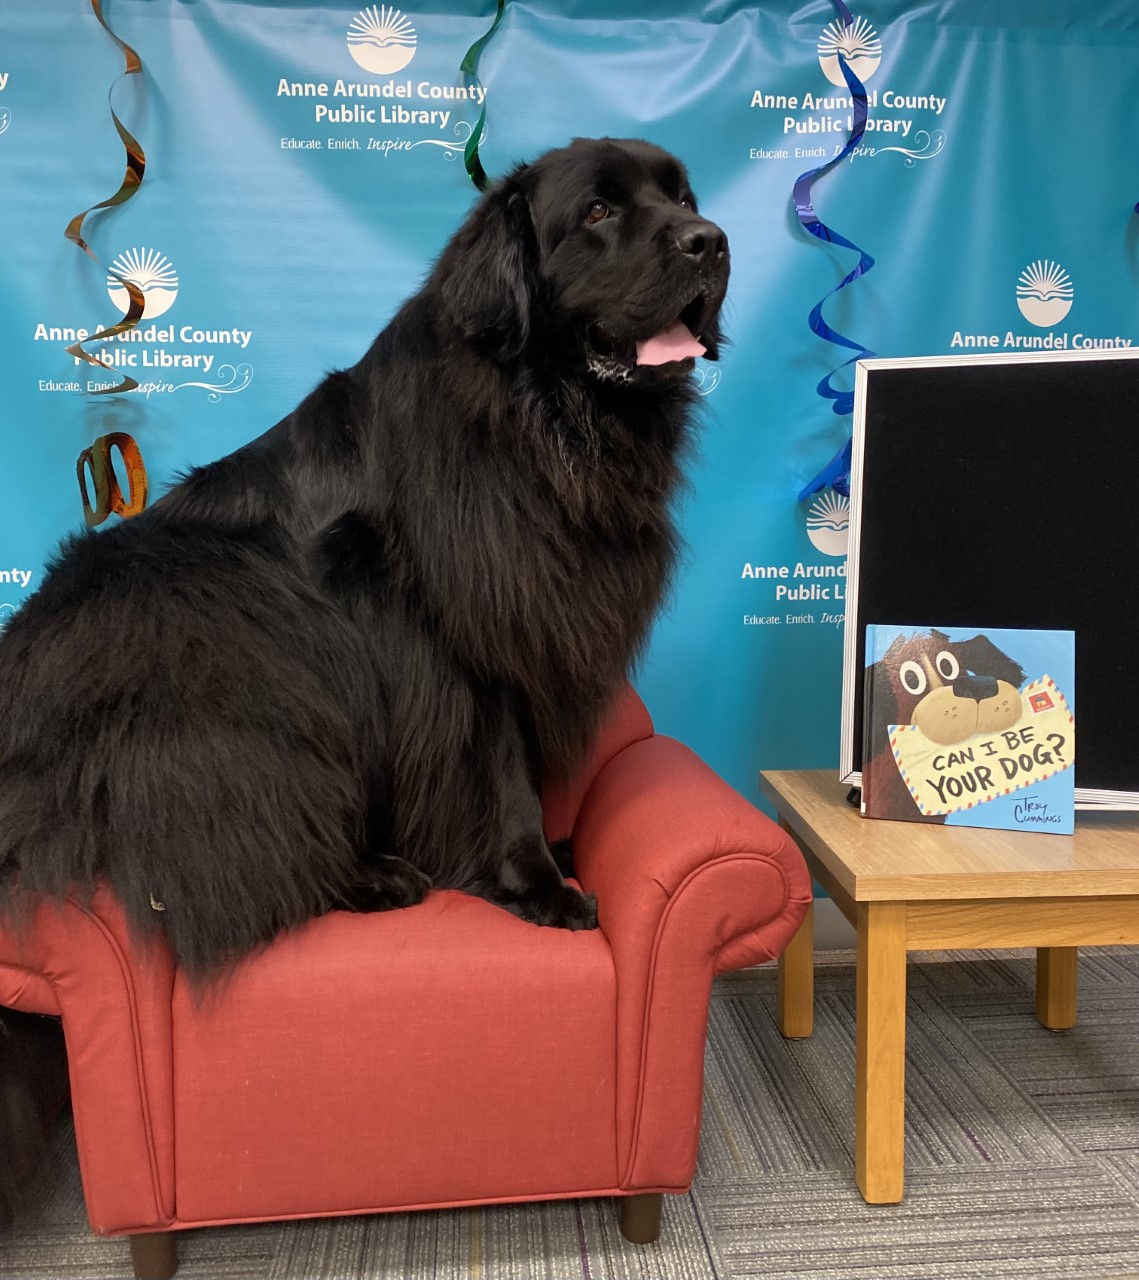 Large black dog sitting on small chair with a book on display on table next to him.